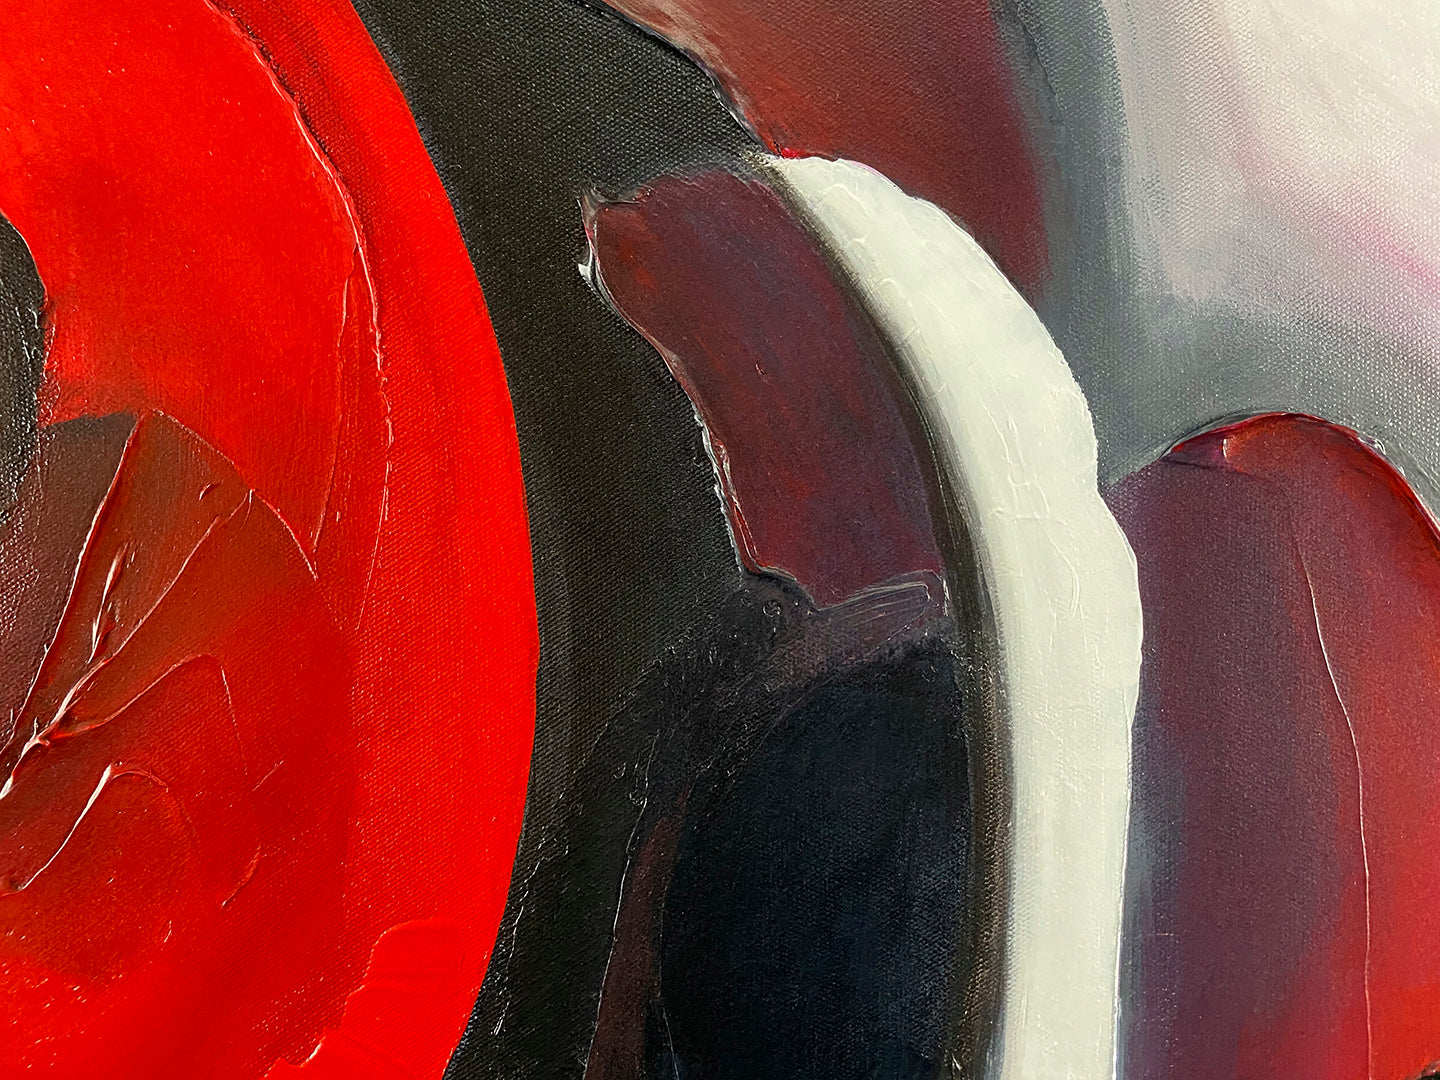 Abstract, acrylic and mixed-media painting close-up 1. texture paste, red, black, grey, and white acrylic paint on round canvas with curved-edges